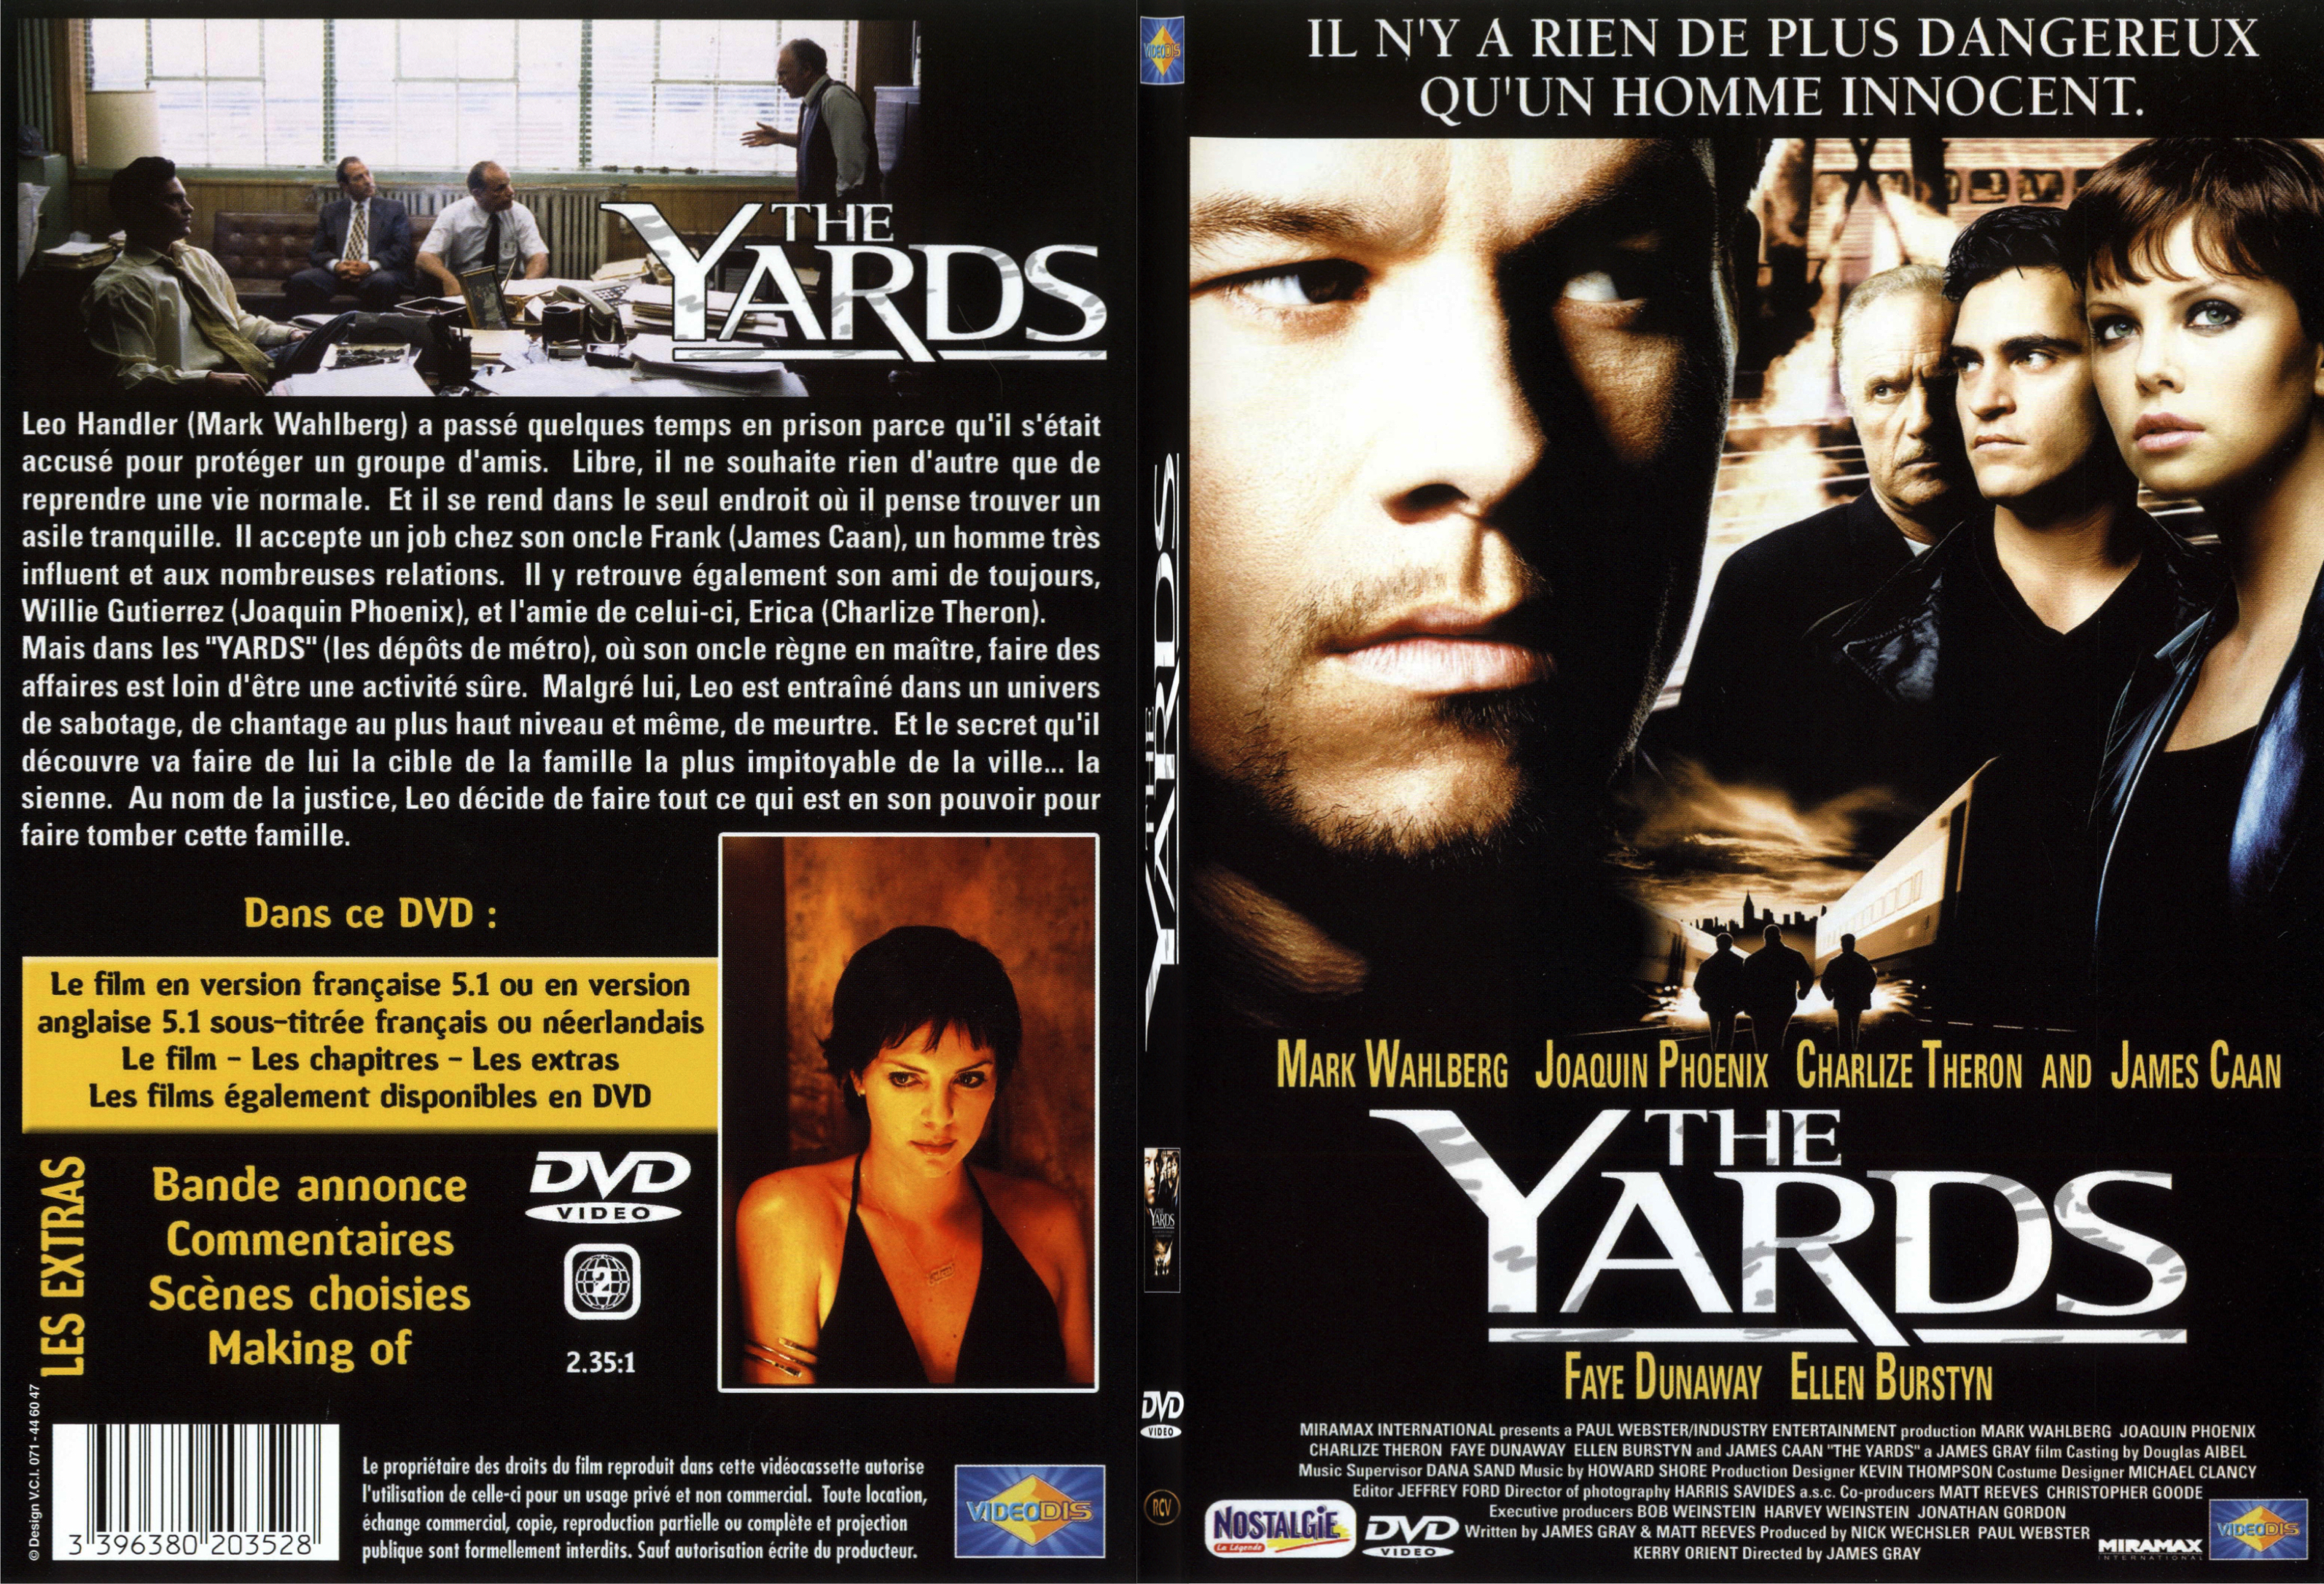 Jaquette DVD The Yards - SLIM